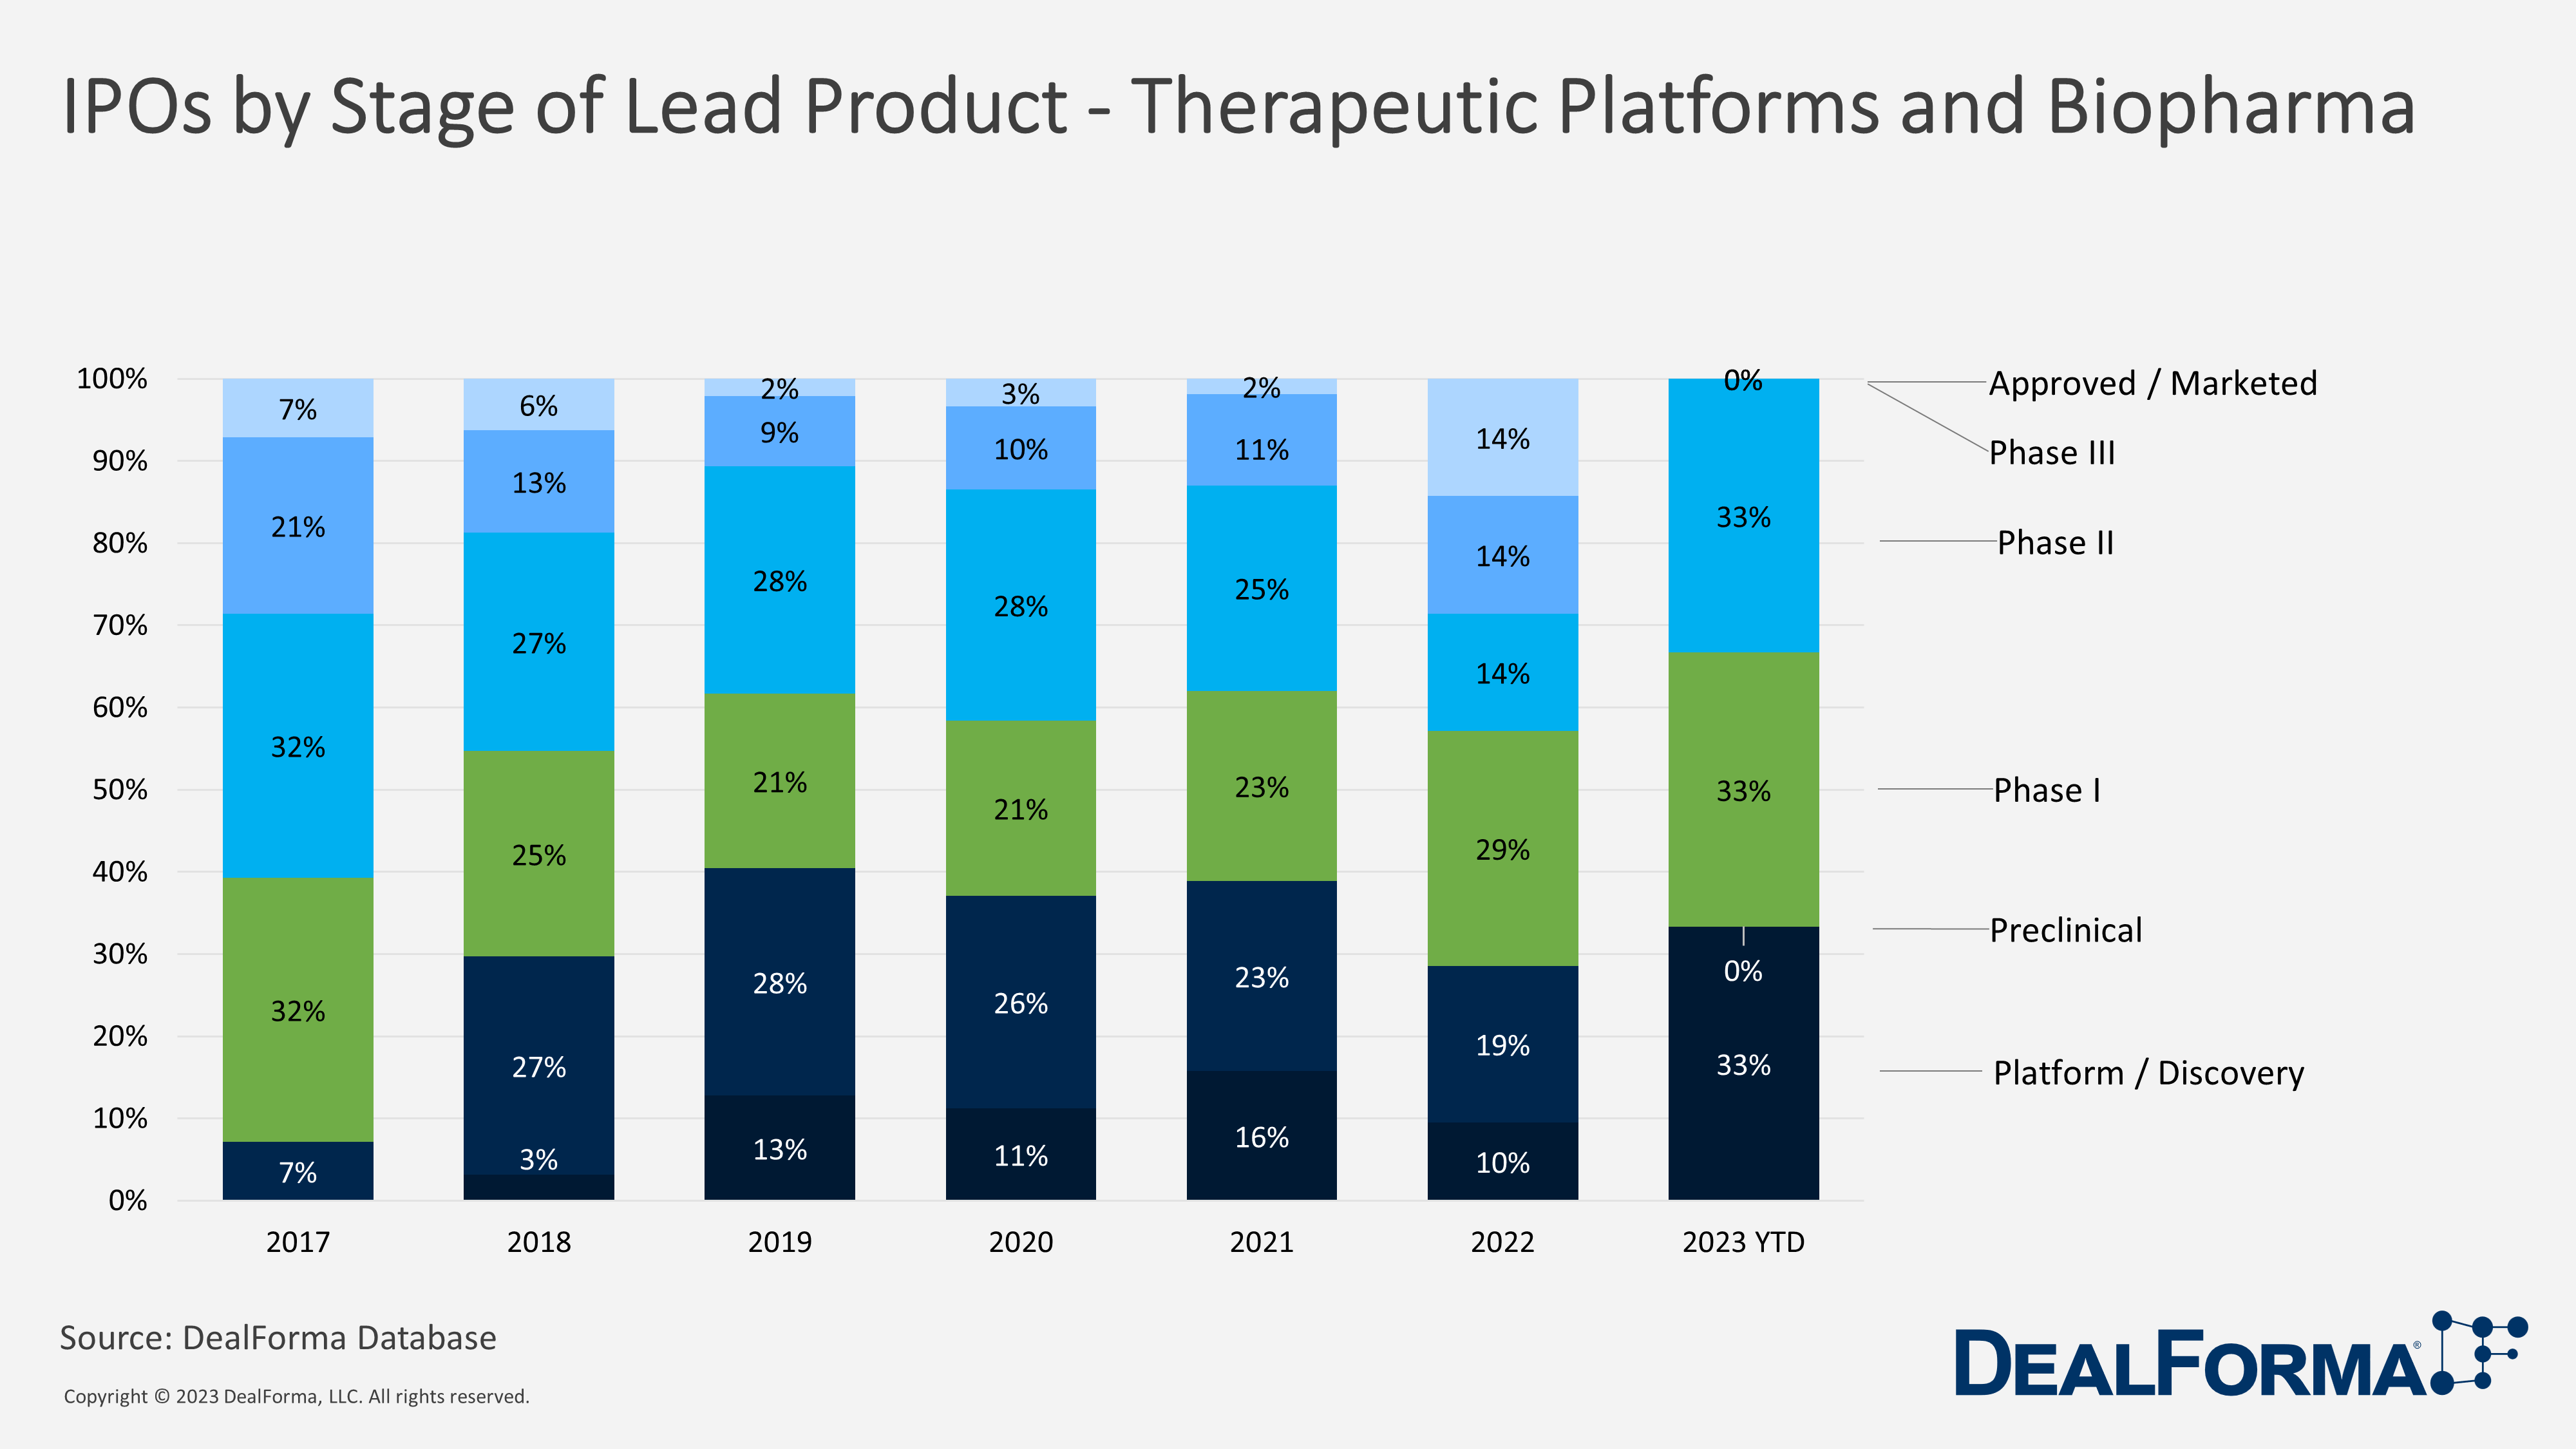 IPOs by Stage of Lead Product - Therapeutic Platforms and Biopharma